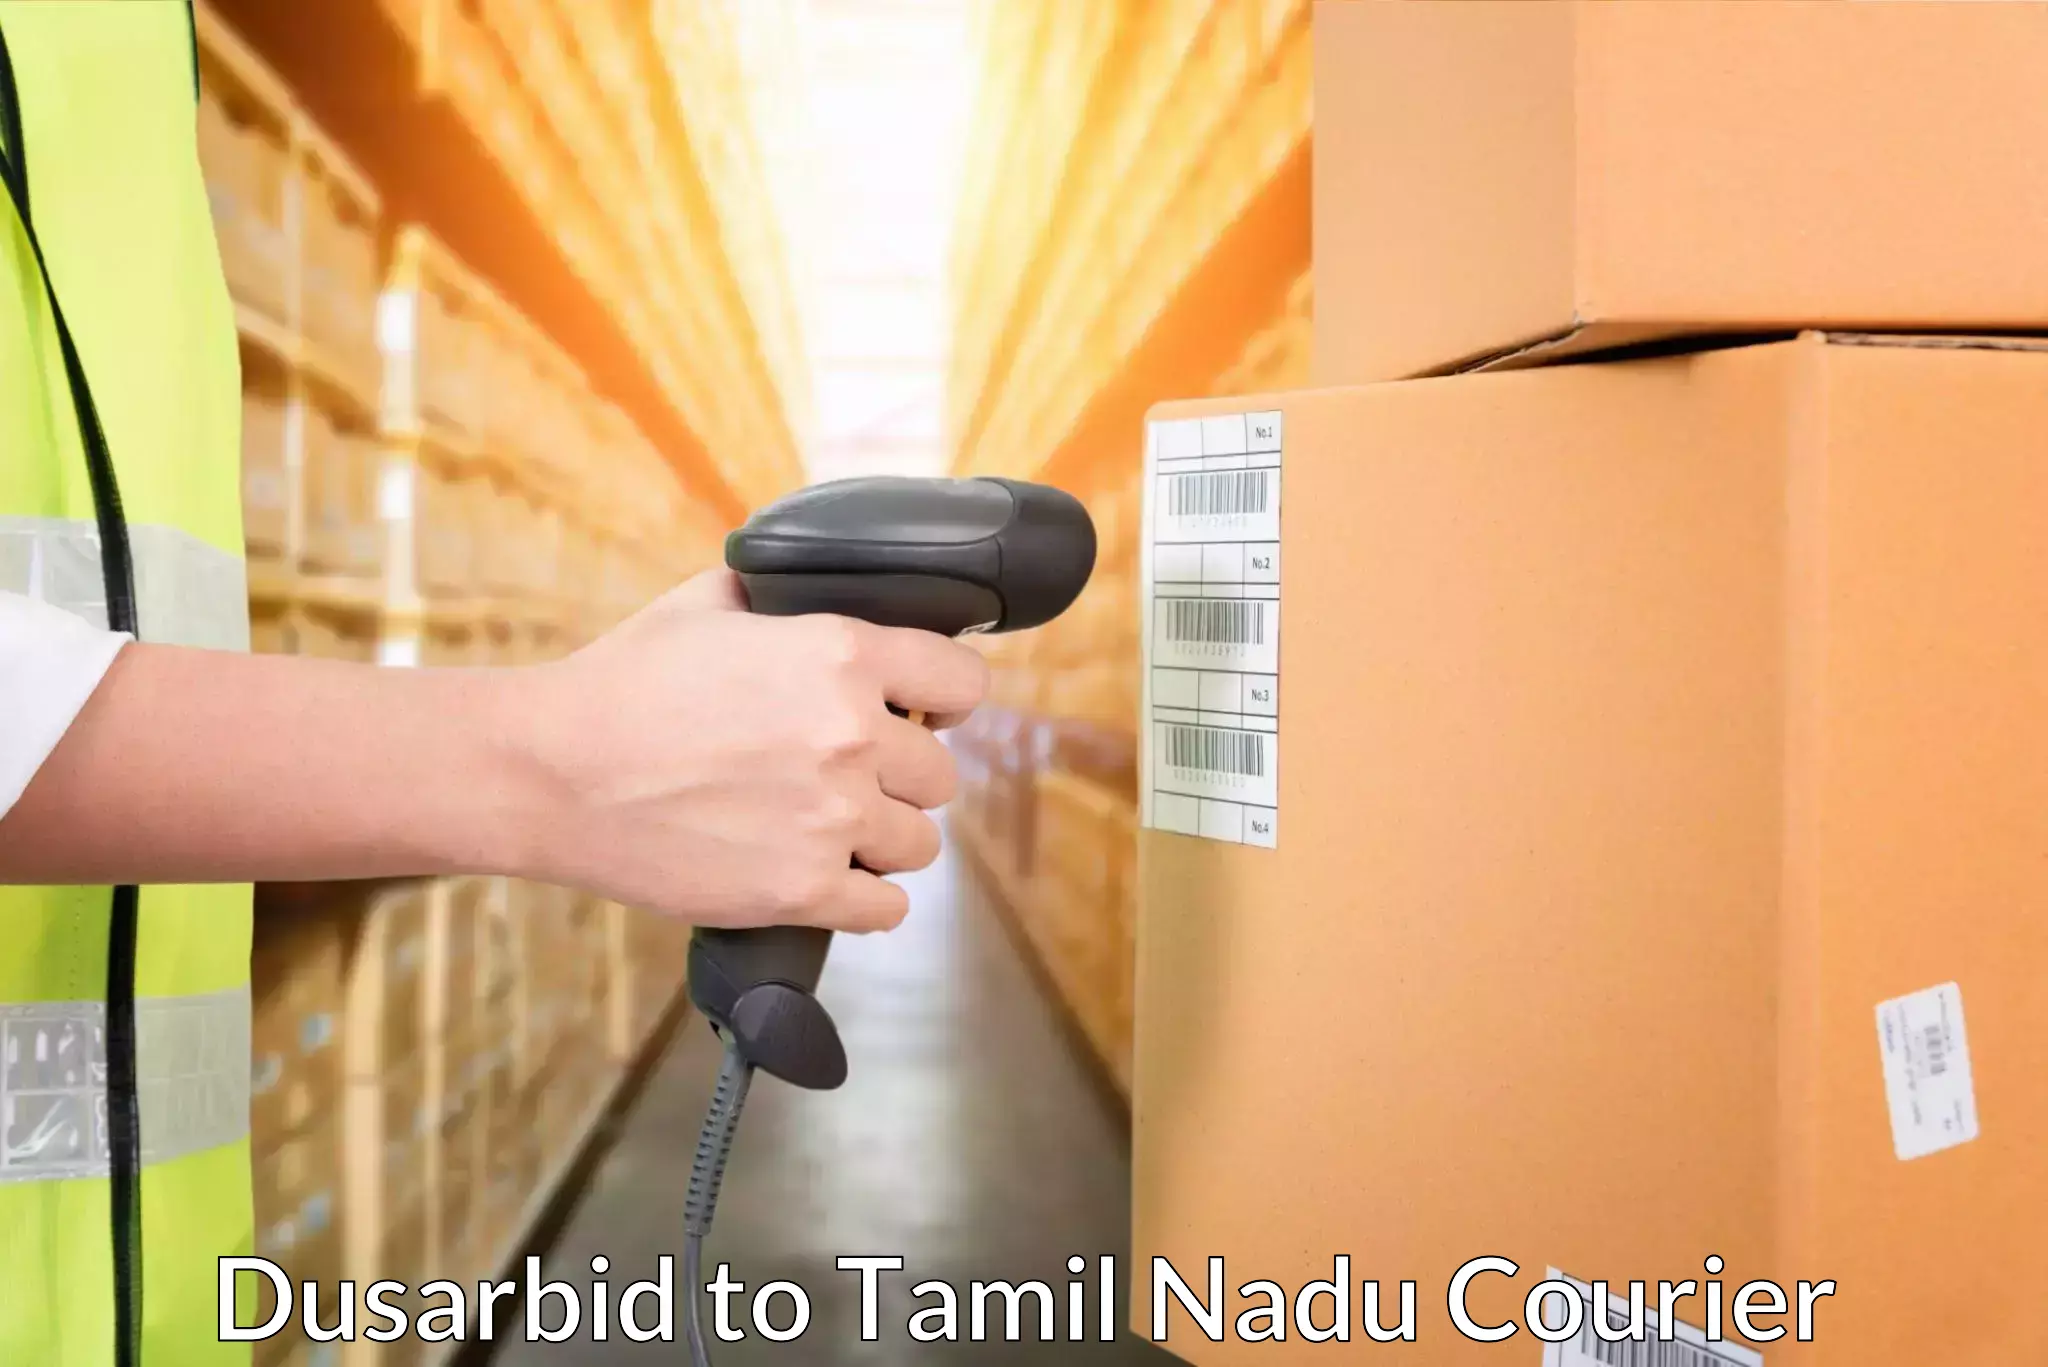 Cargo courier service Dusarbid to Vellore Institute of Technology